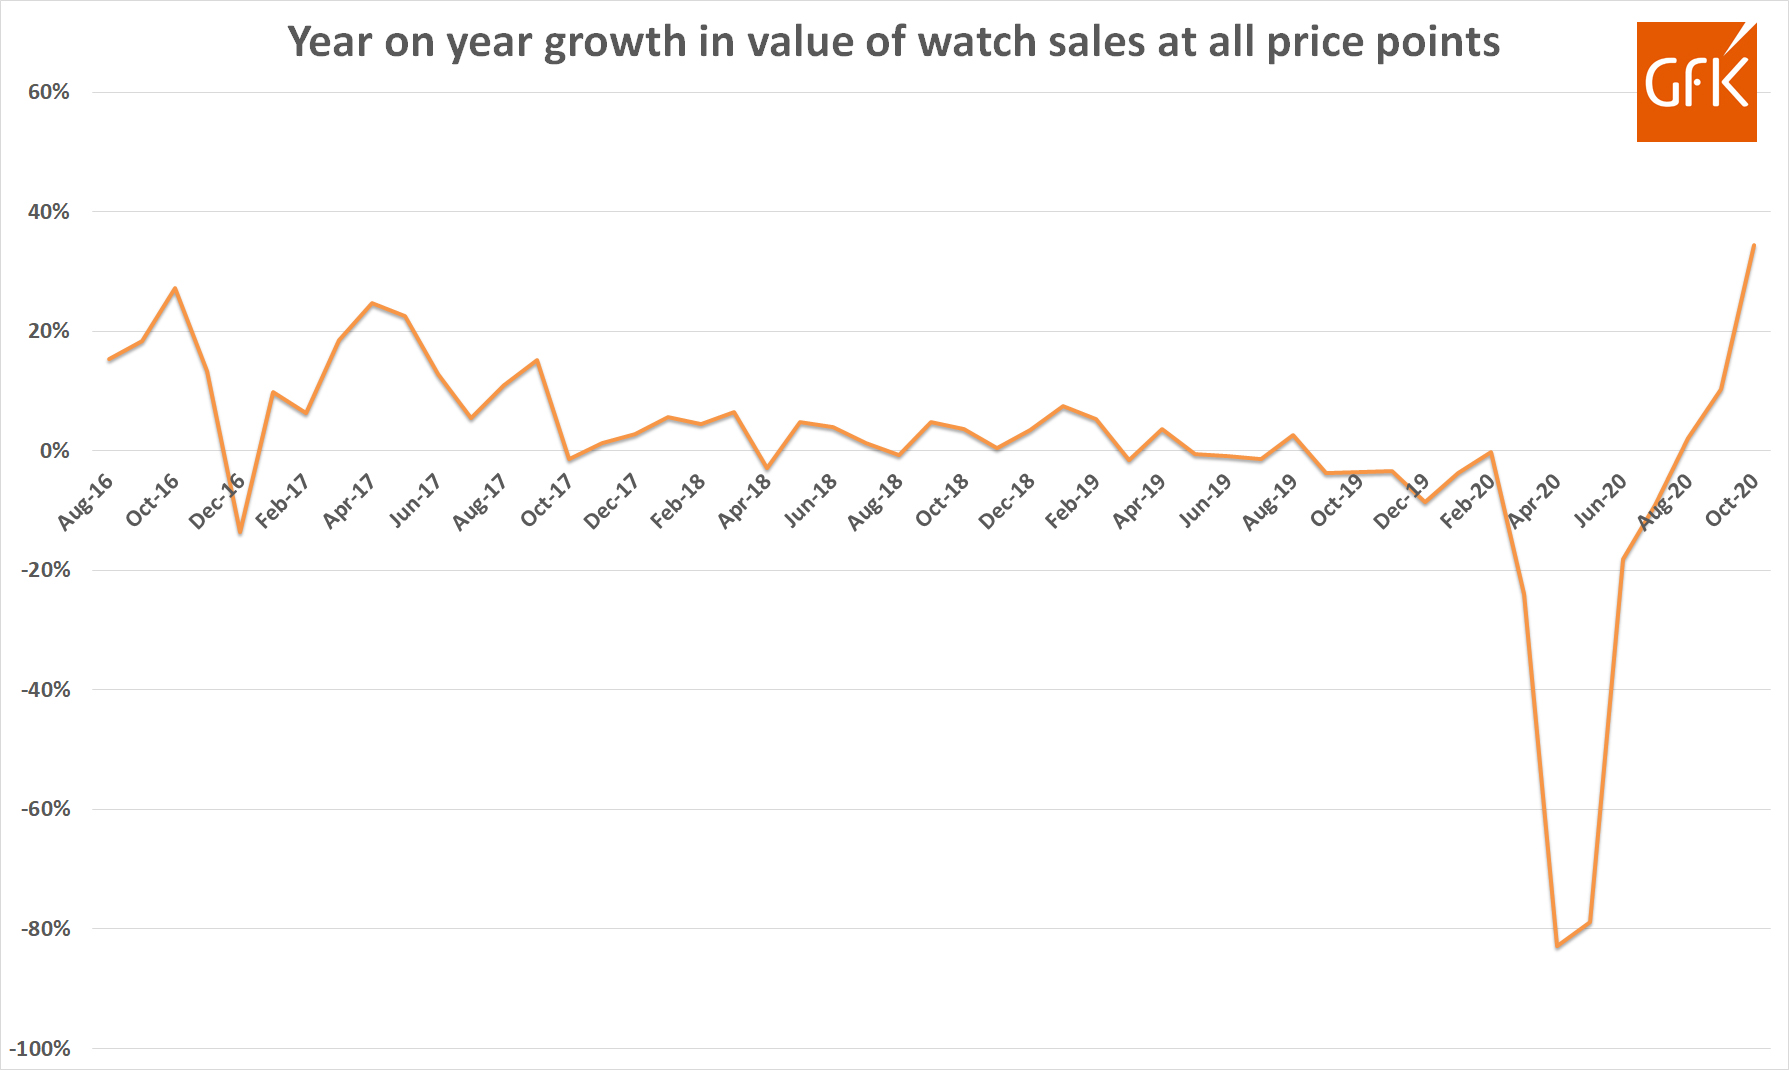 Gfk yoy growth in sales all price points